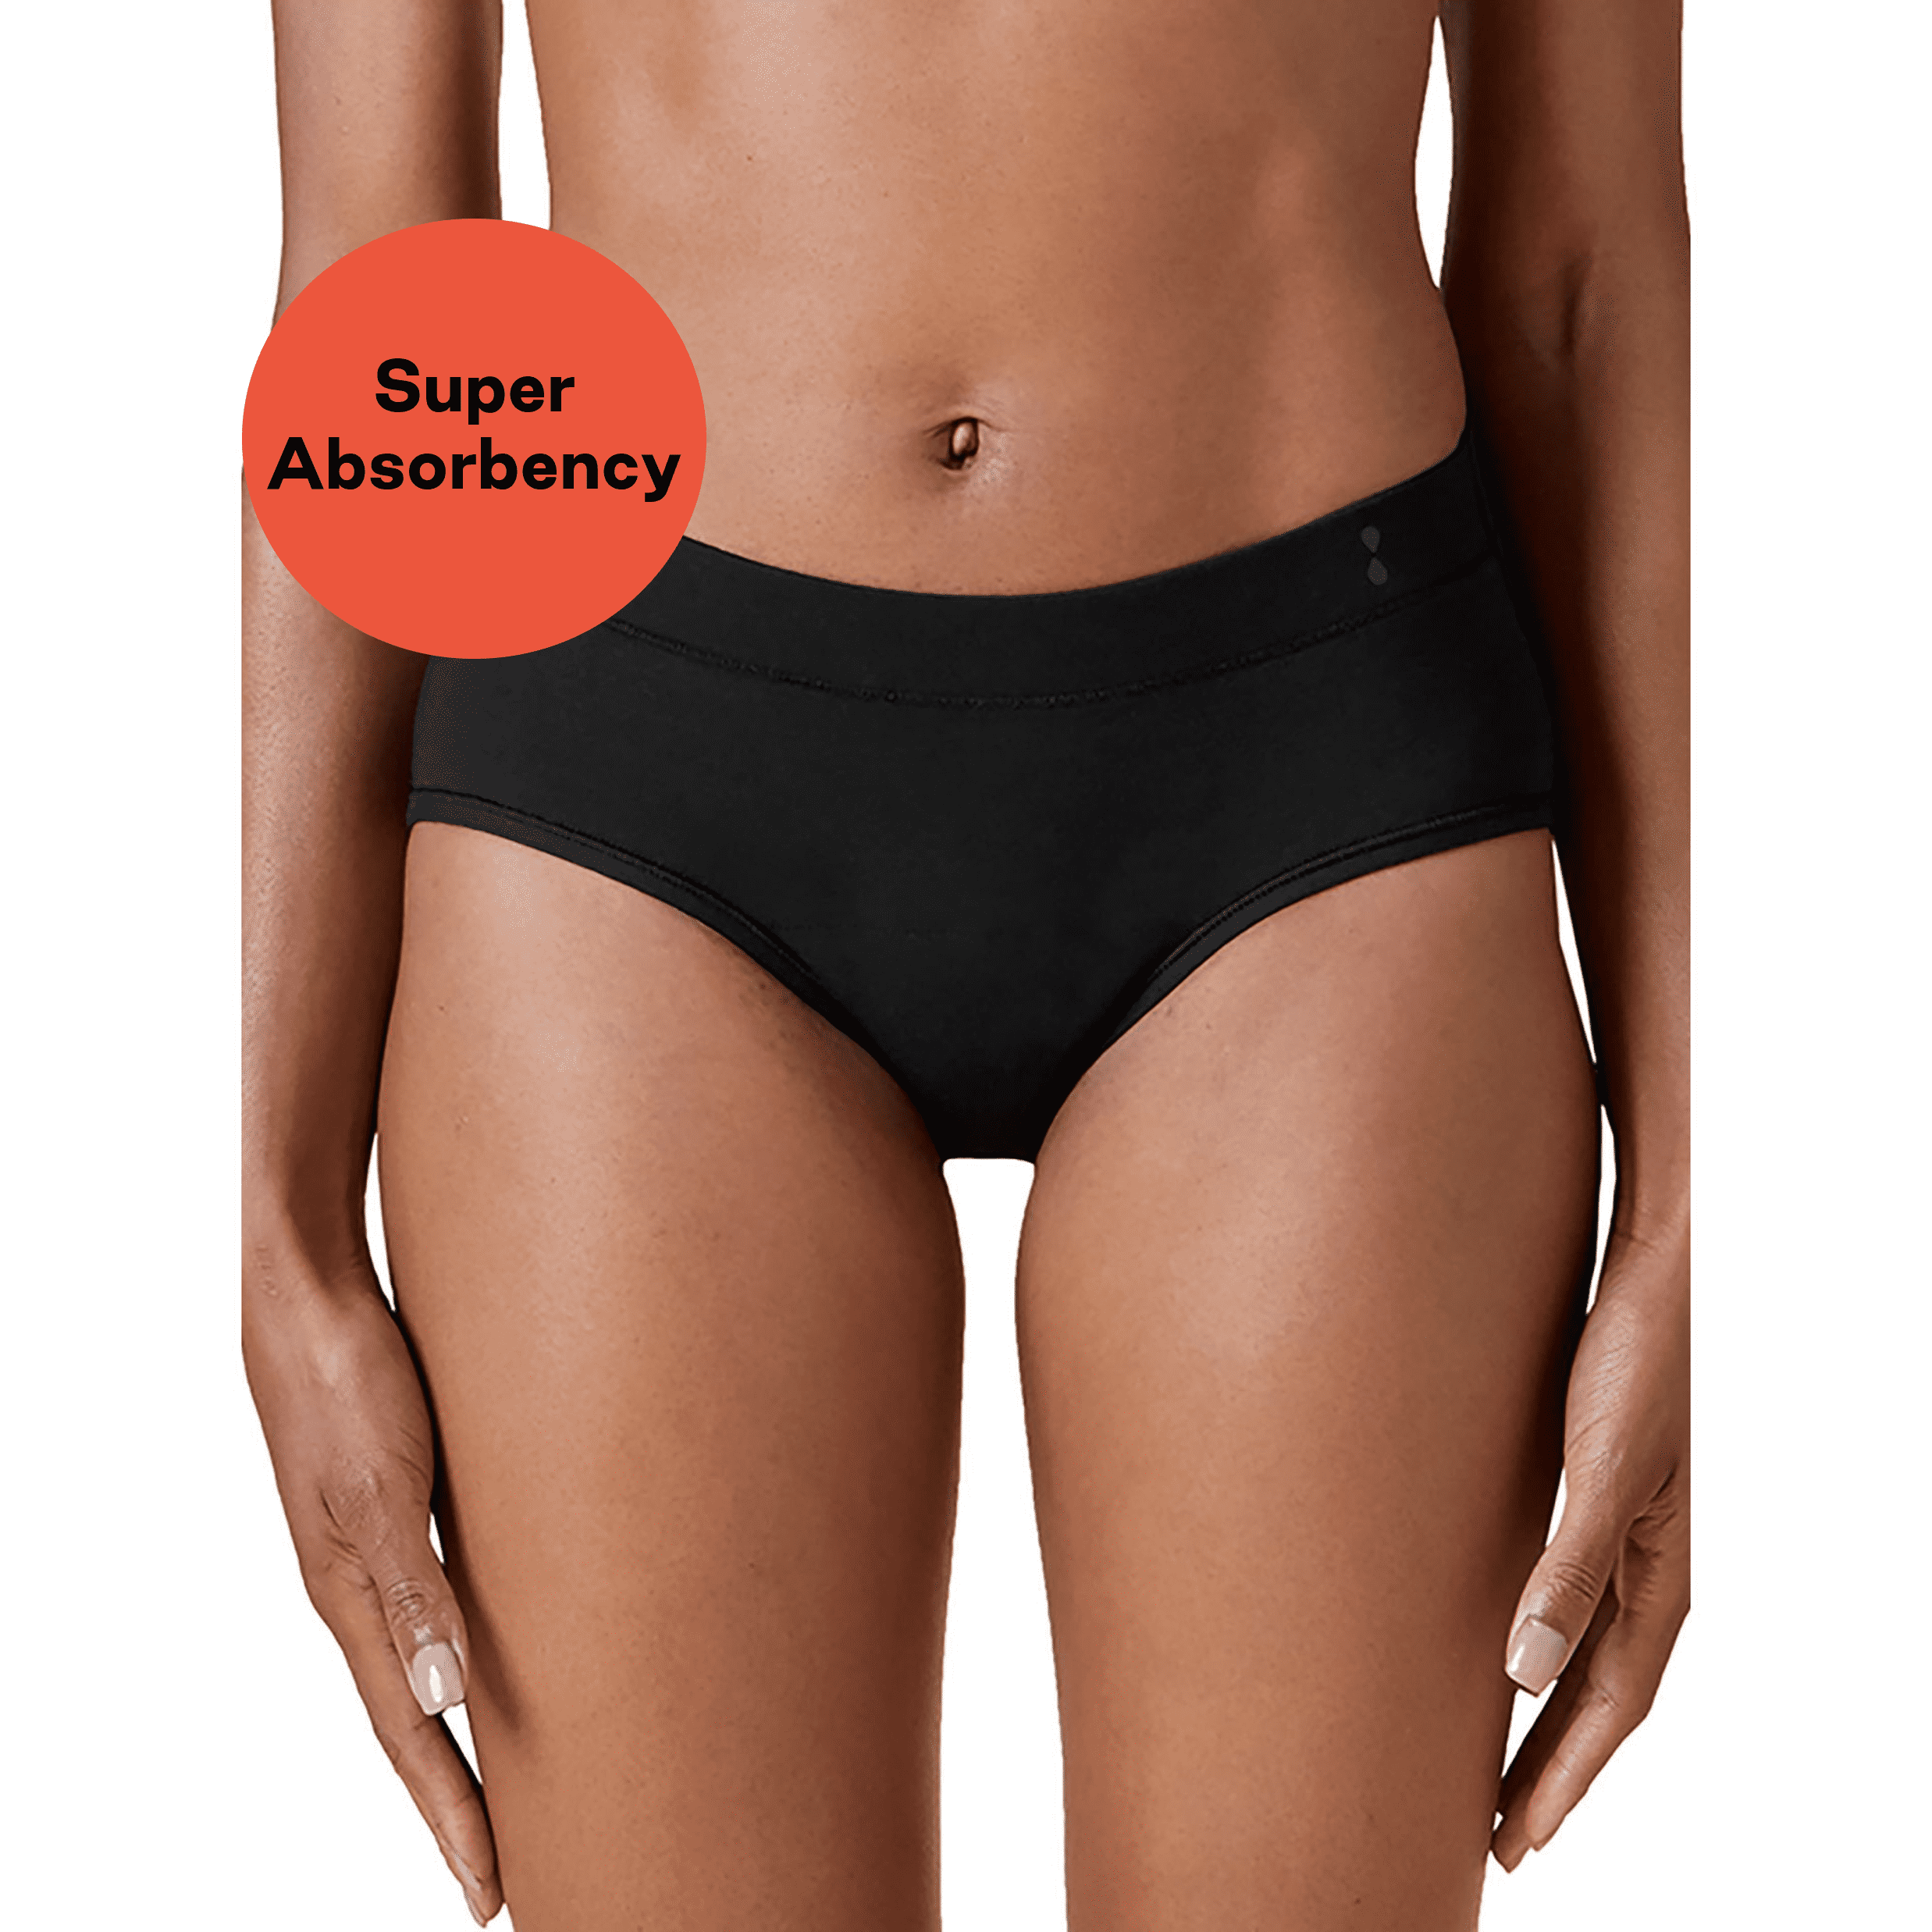 Women's Super Absorbency Cotton Brief Period Underwear, 1 unit, Size XL –  Thinx : Pads and cup